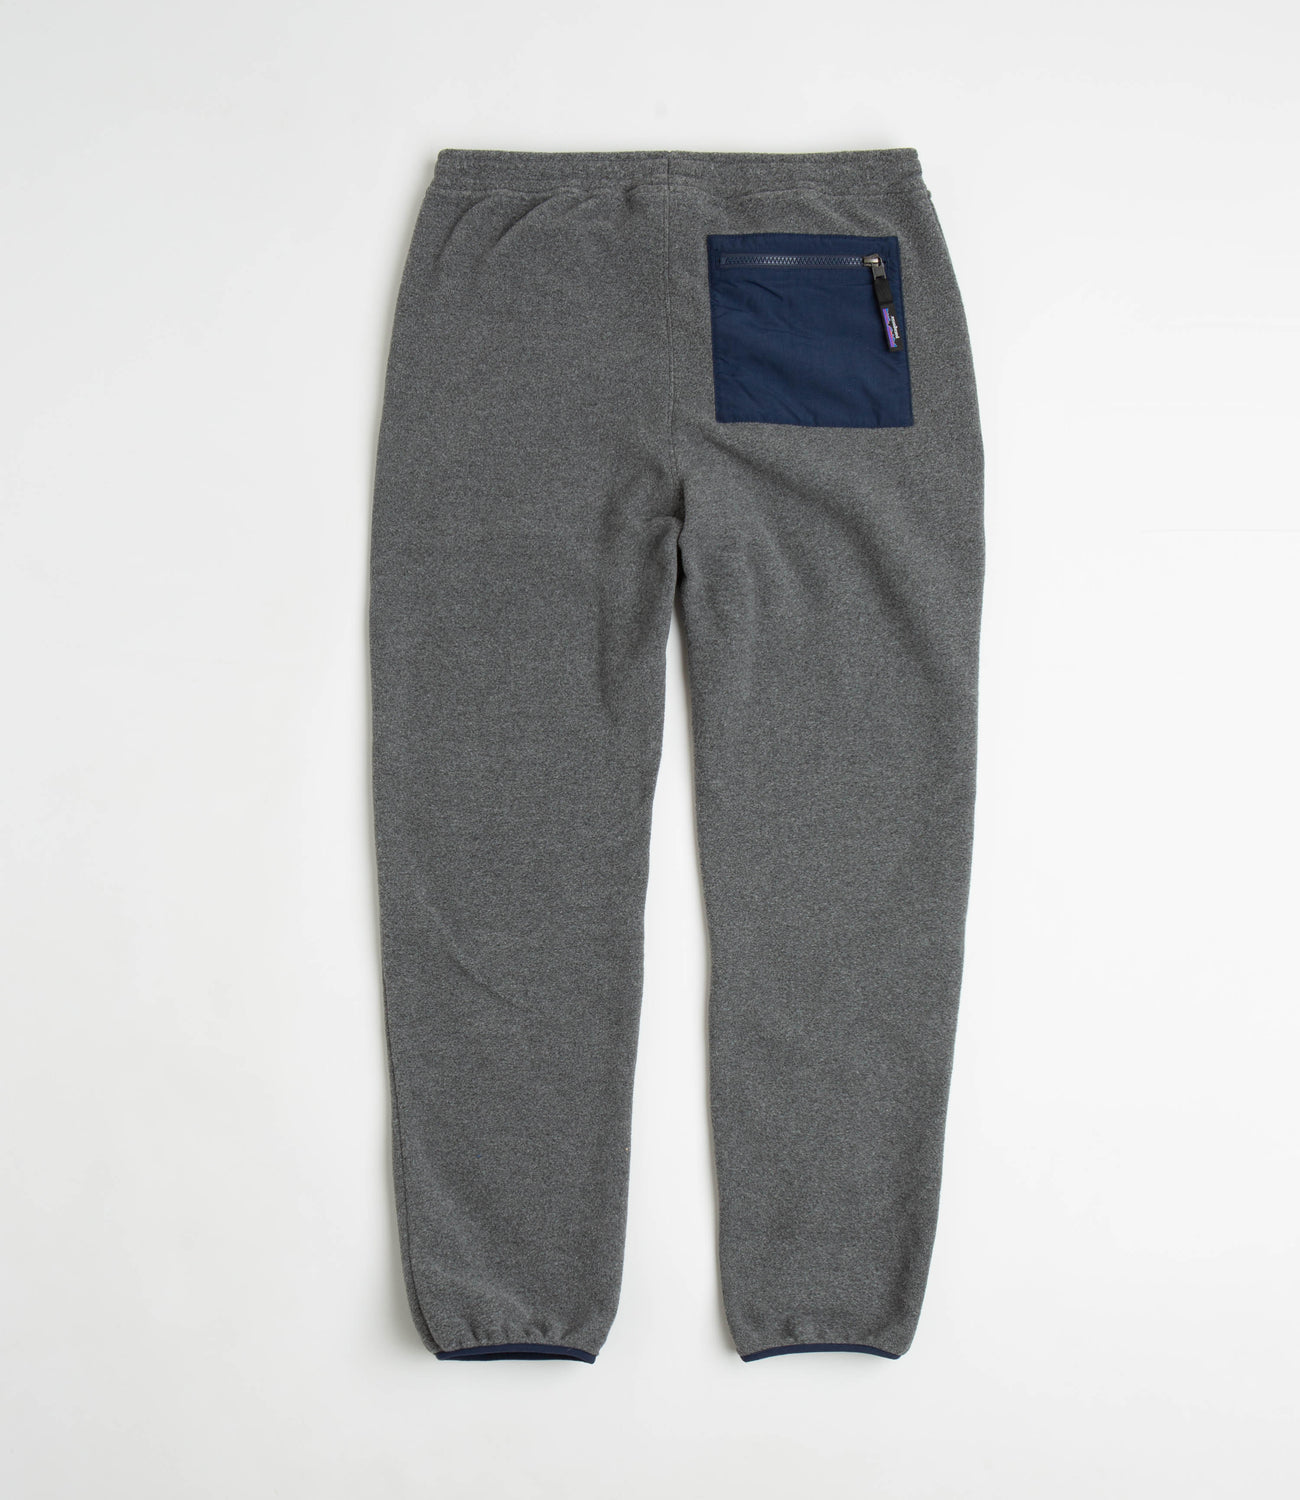 Patagonia Synchilla Snap-T Fleece Pants Black & Forge Gray Large L